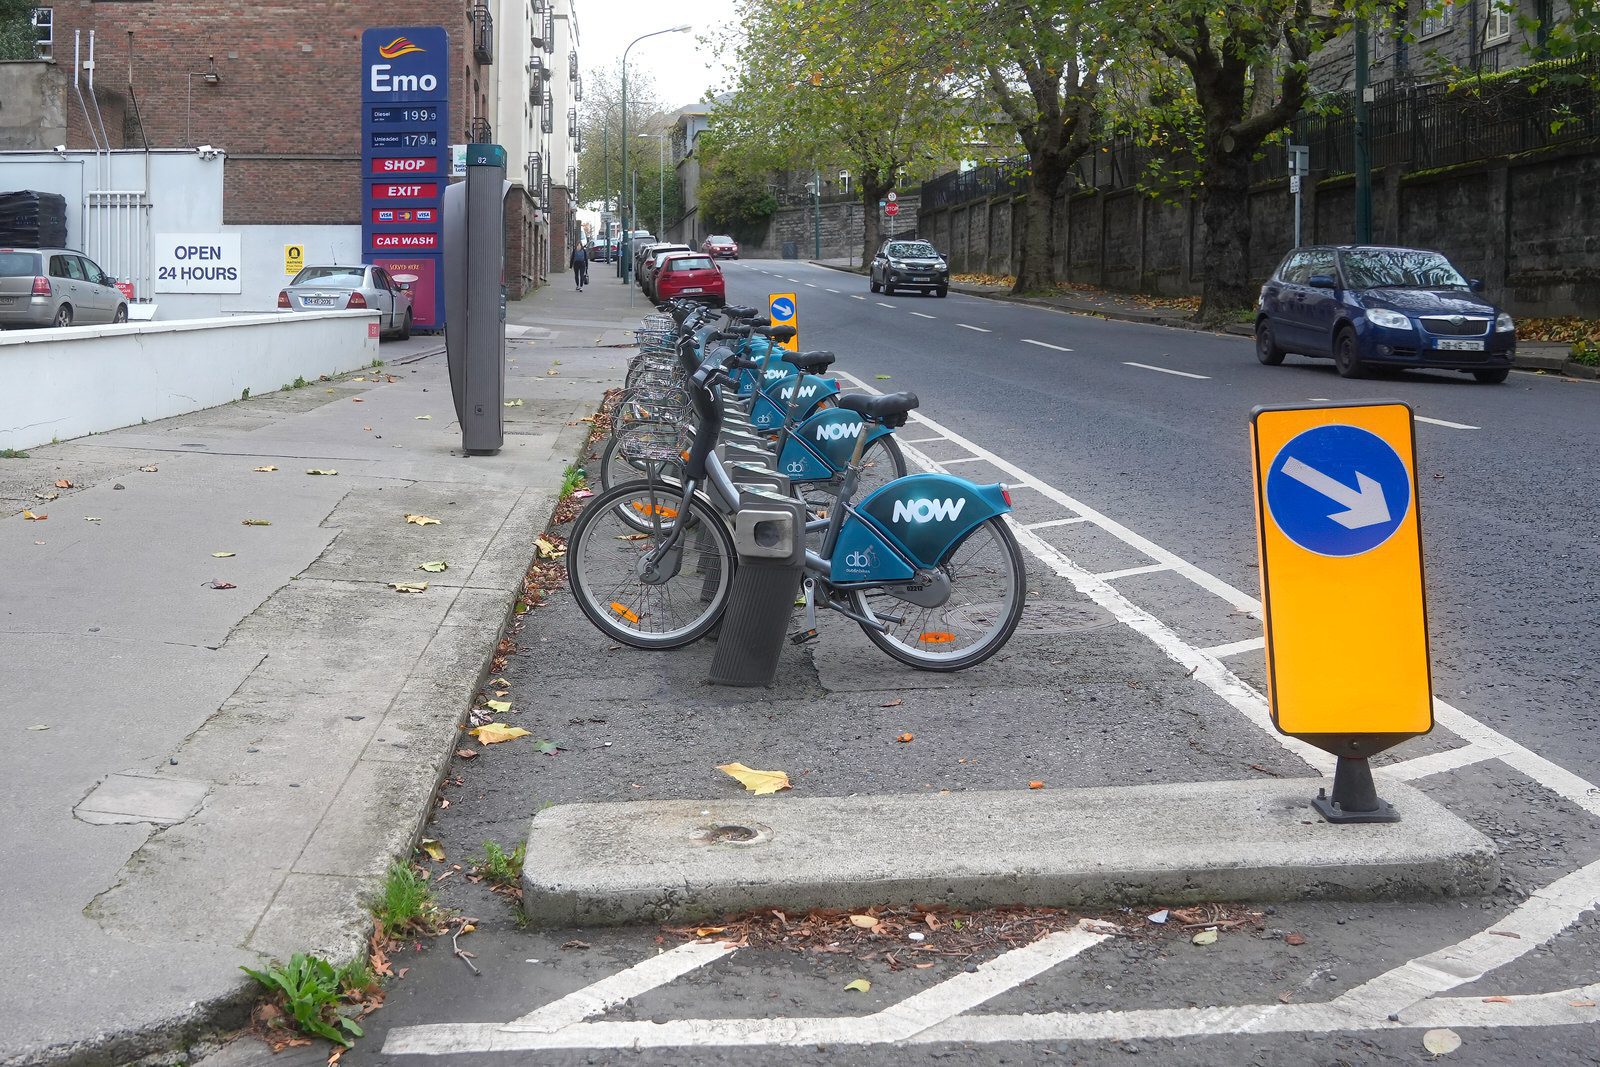 DUBLINBIKES DOCKING STATION 82 IS LOCATED HERE AT MOUNT BROWN 003